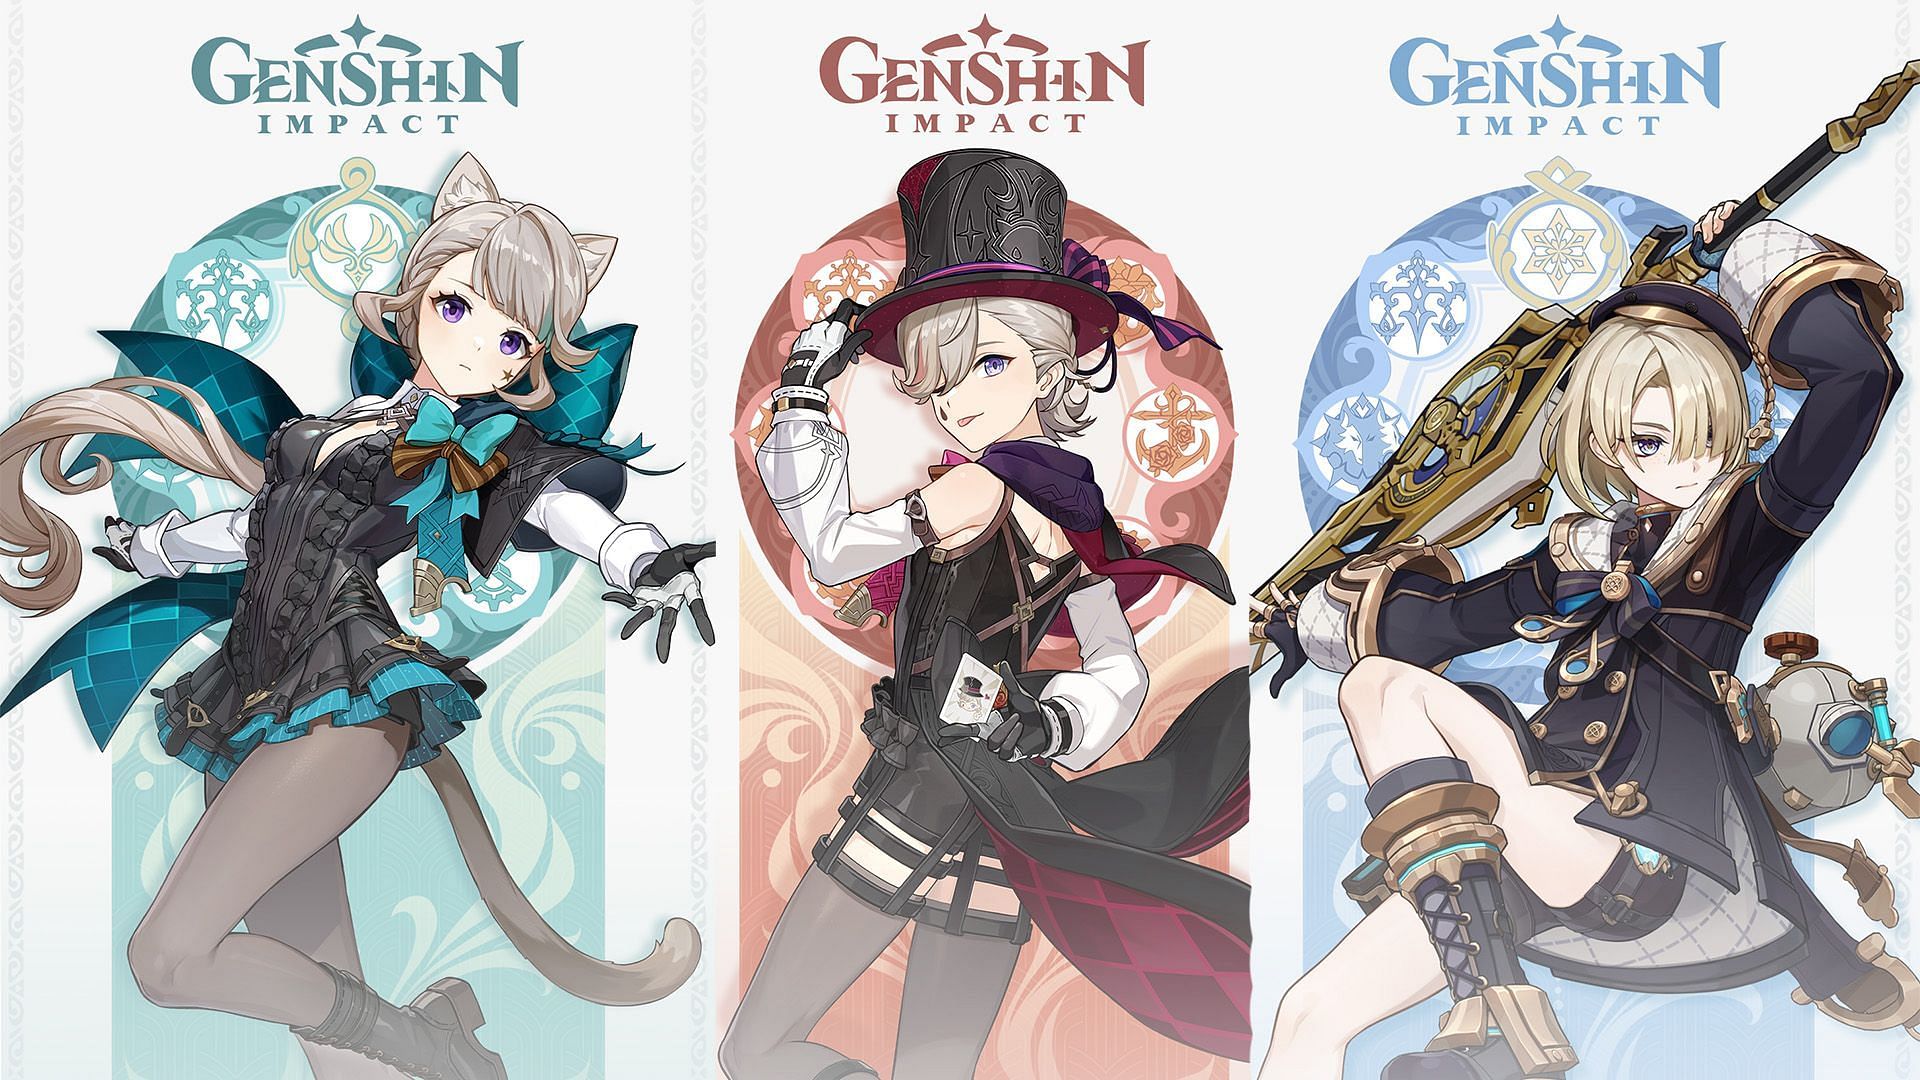 Genshin Impact 4.0 Fontaine release date and start time